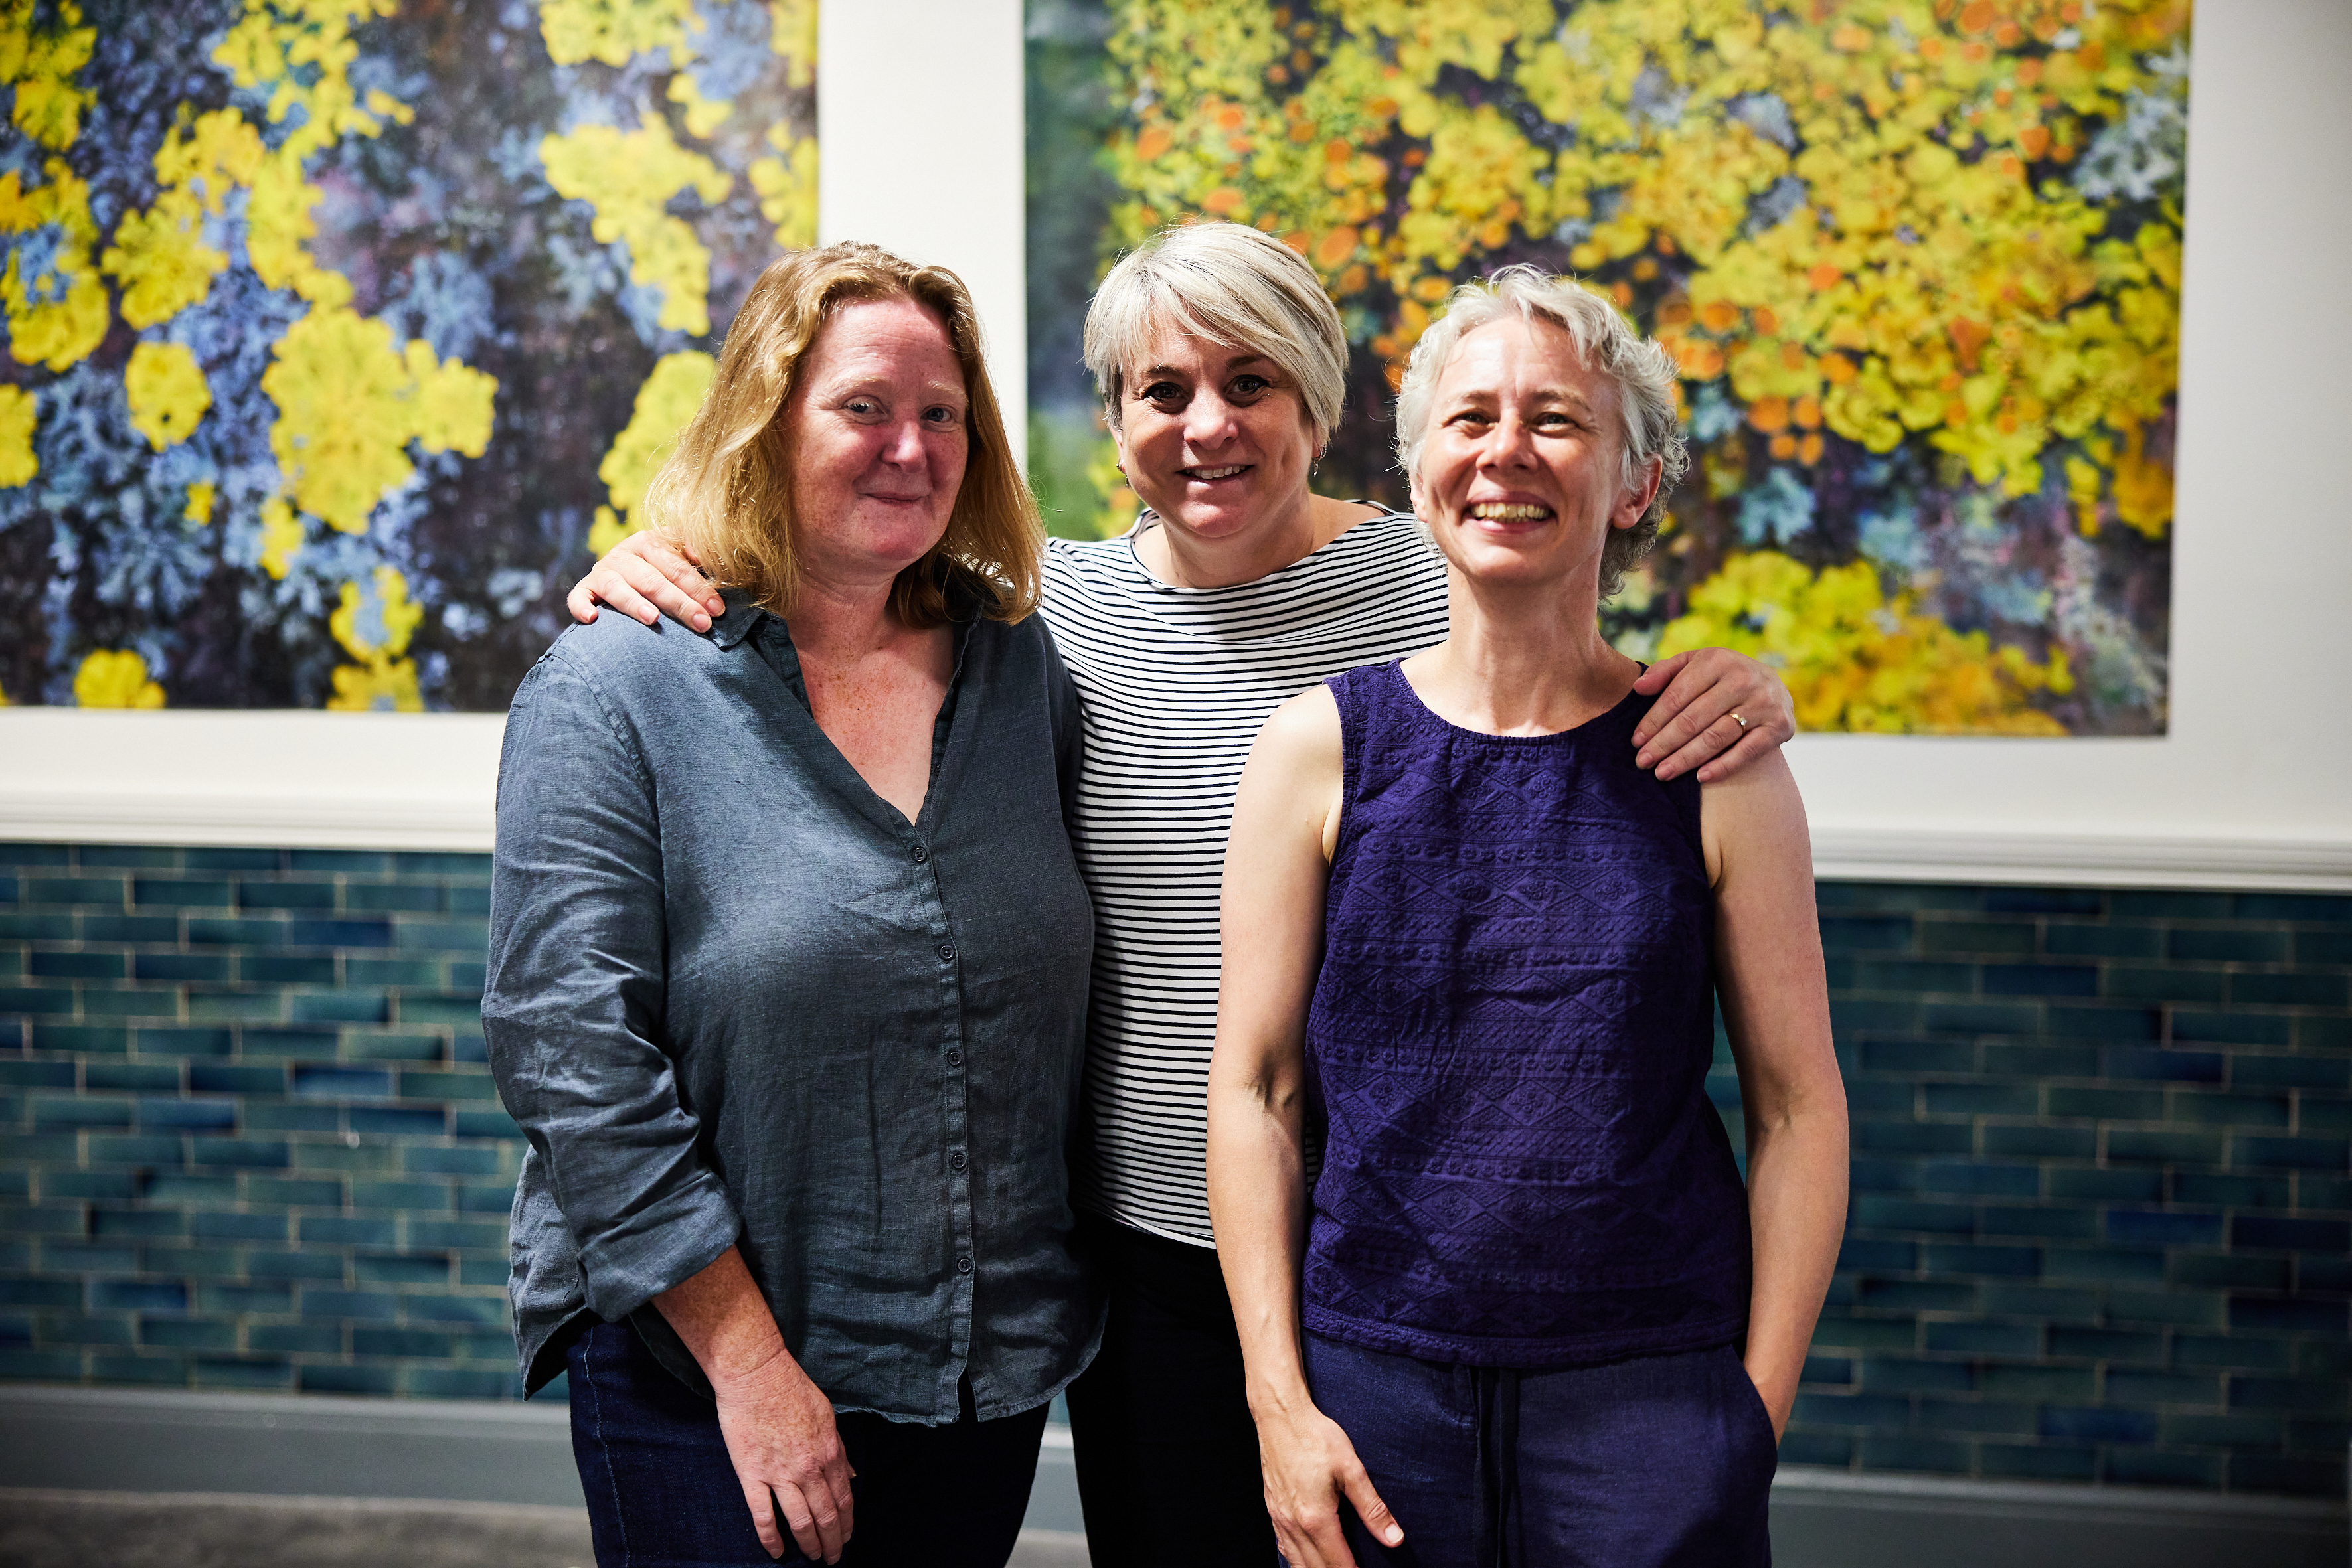 Helen Thomas, Alison Critchlow & Natalie Dowse: Conversations with Nature